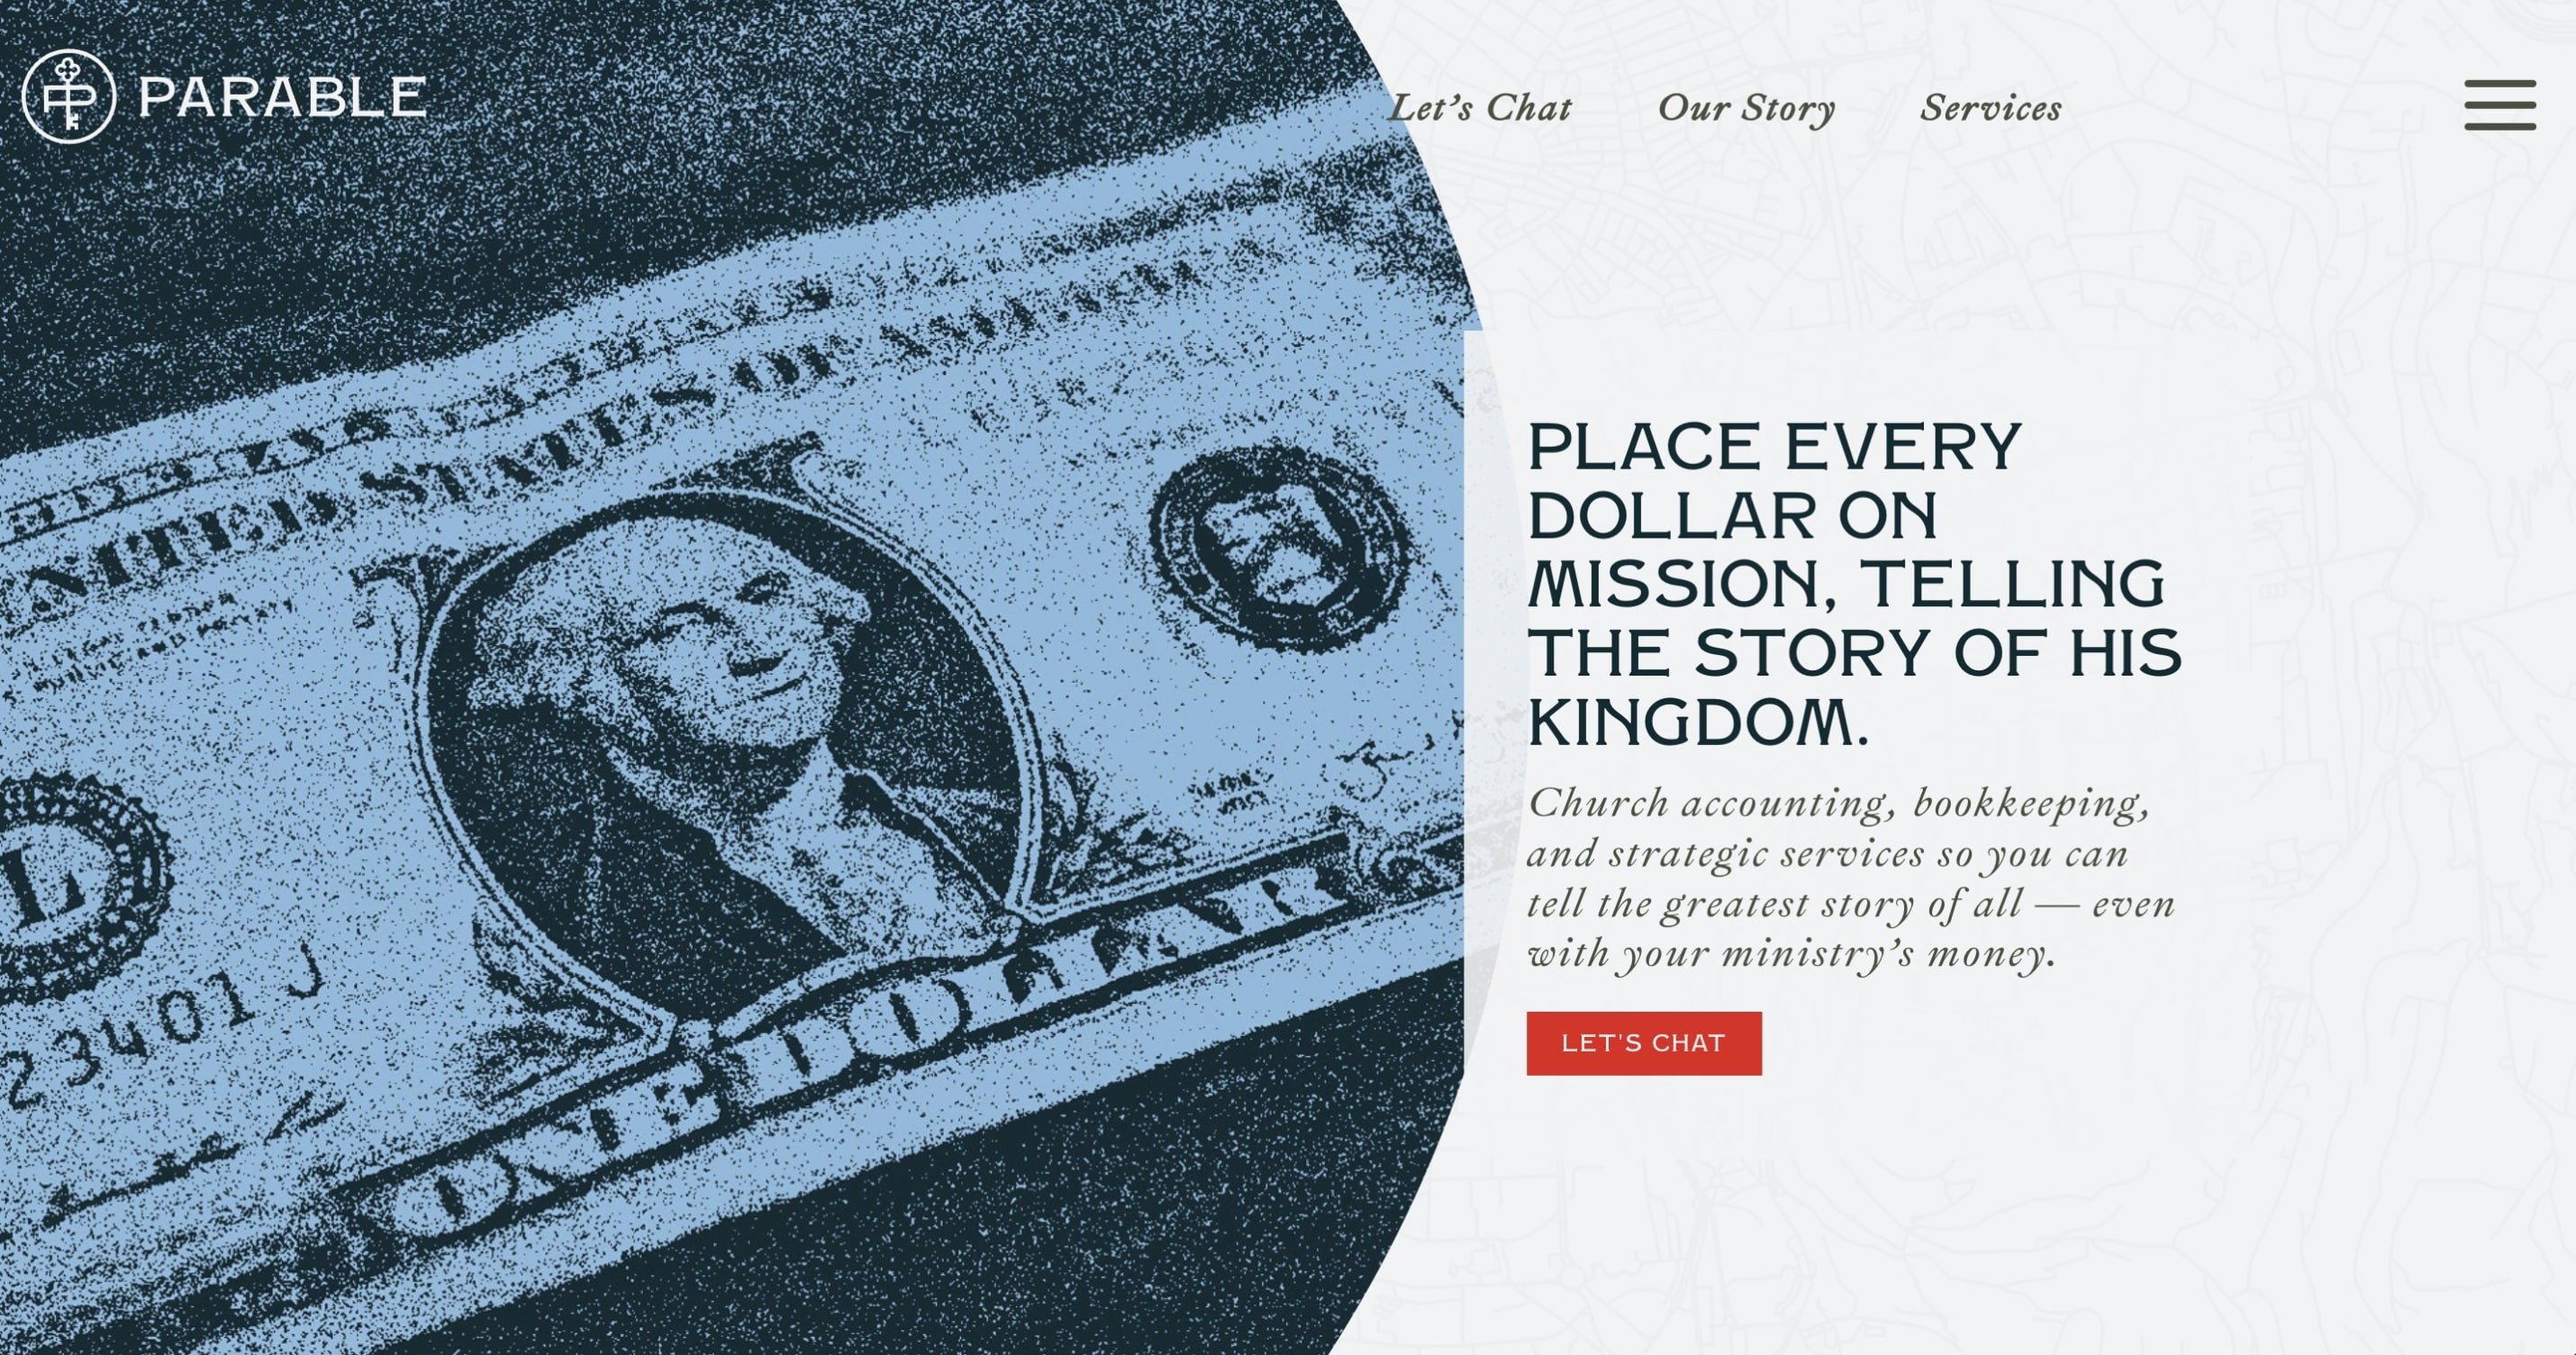 Parable's website is a great example of an accounting firm being clear about their market niche.